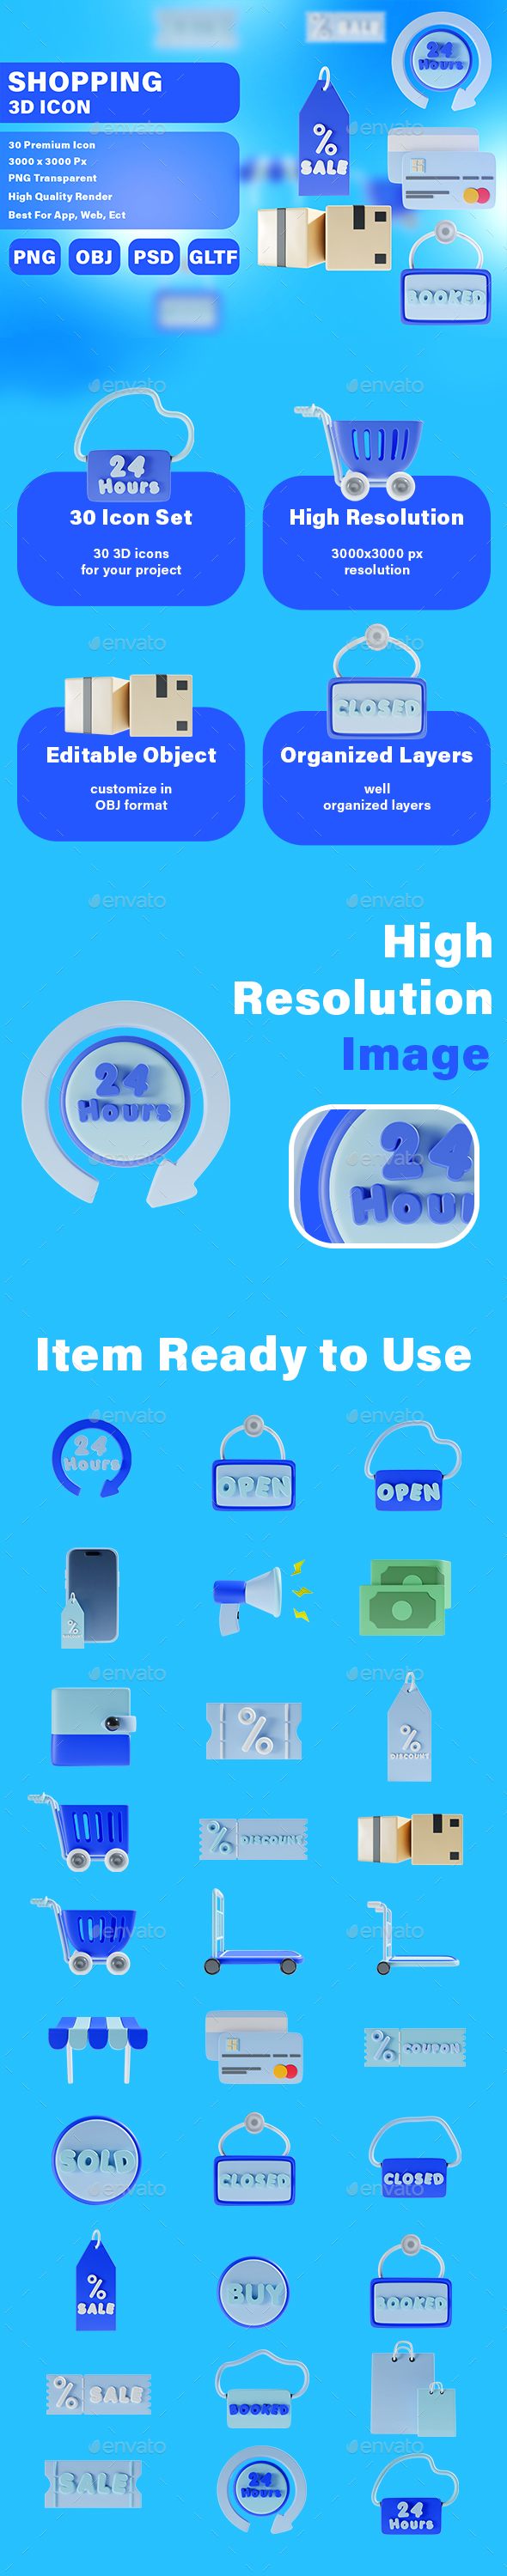 [DOWNLOAD]30 Shopping 3D Icon